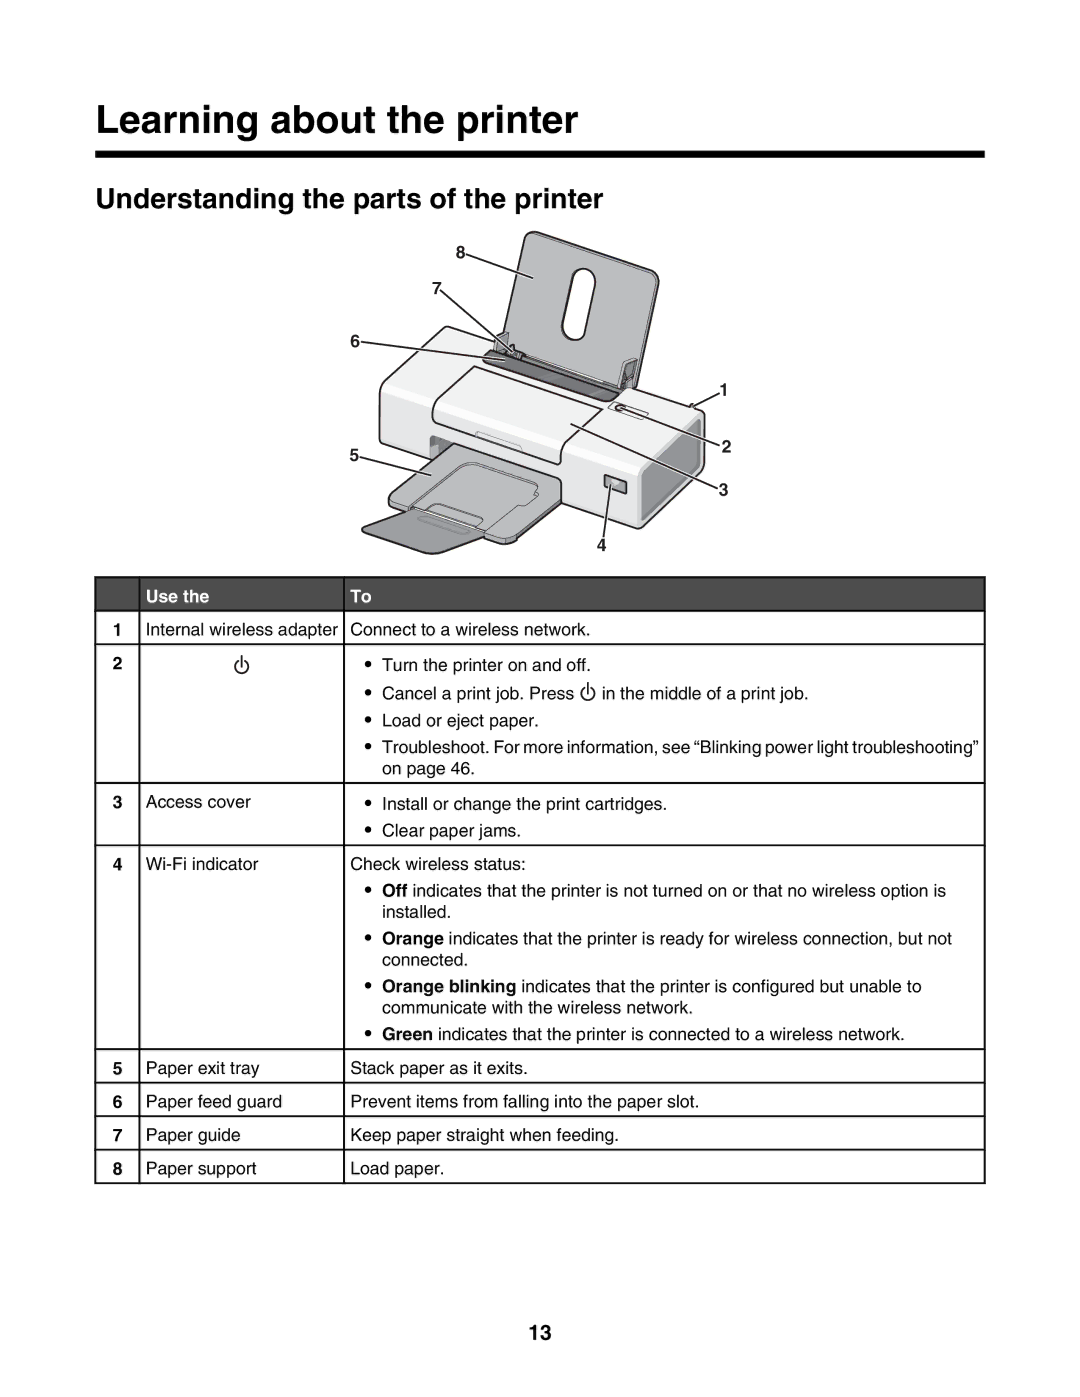 Lexmark 1400 Series manual Learning about the printer, Understanding the parts of the printer, Use 